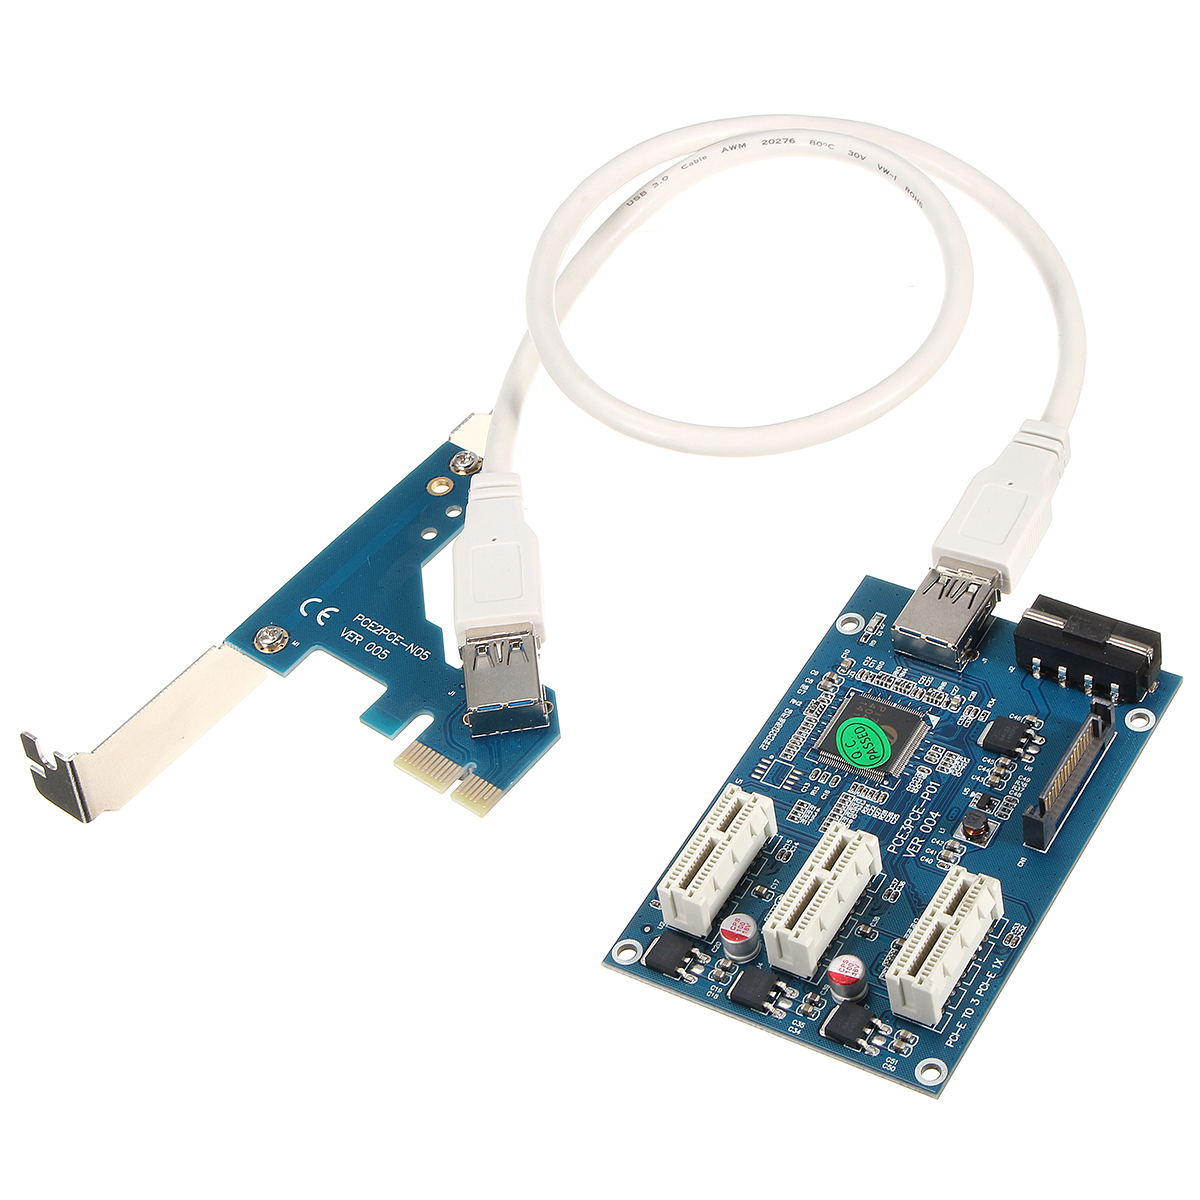 

PCI-E 1X Expansion Kit 1 to 3 Ports Switch Multiplier Hub Riser Card + USB Cable